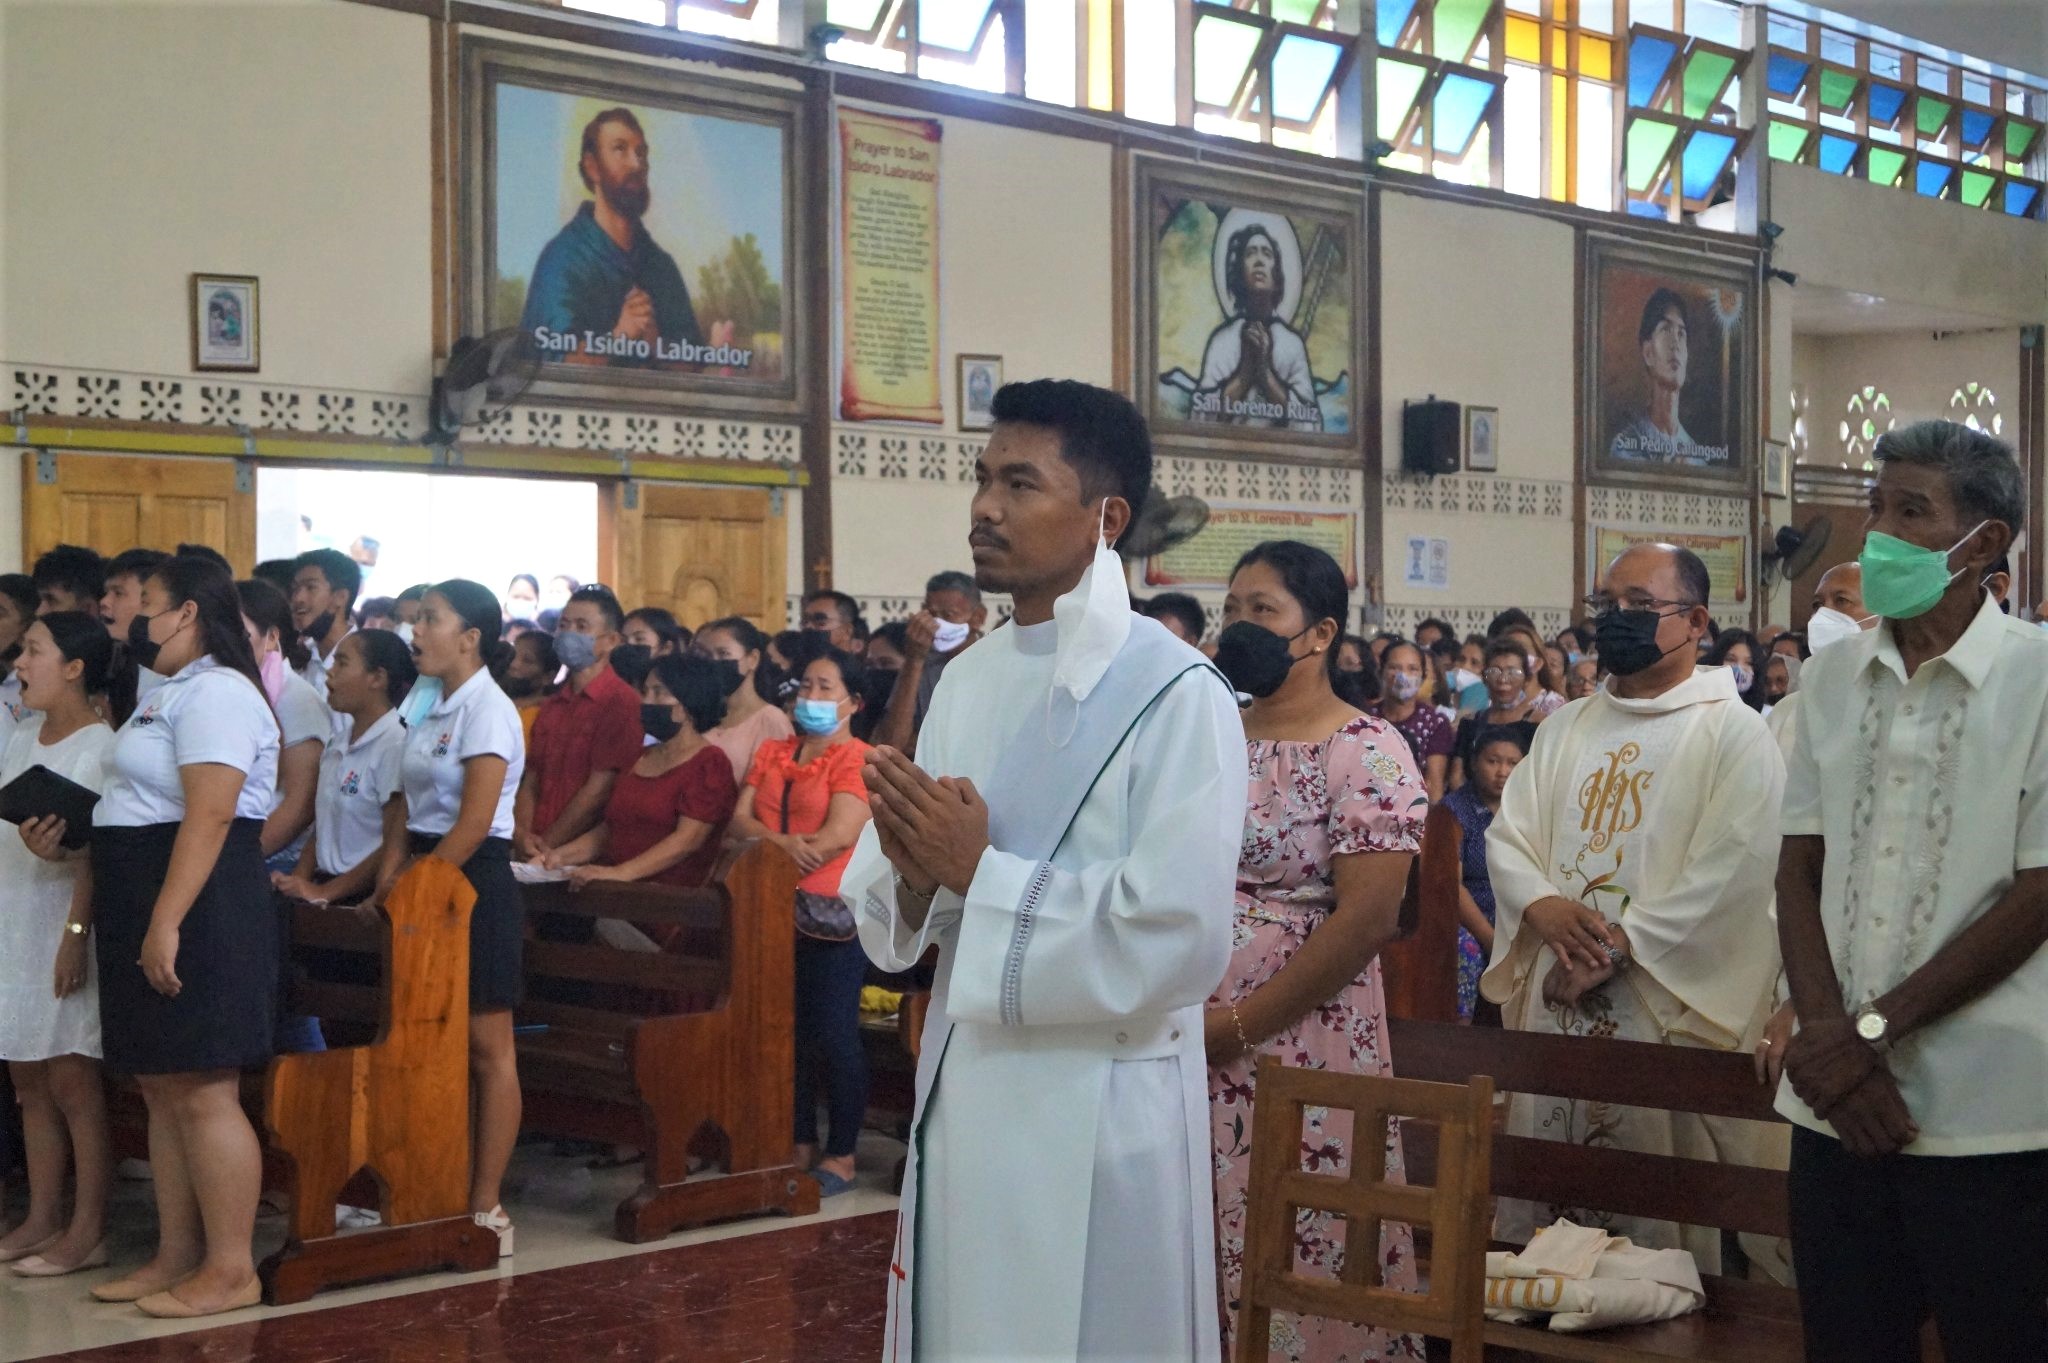 Joy as Second Columban Priest Ordained in the Philippines